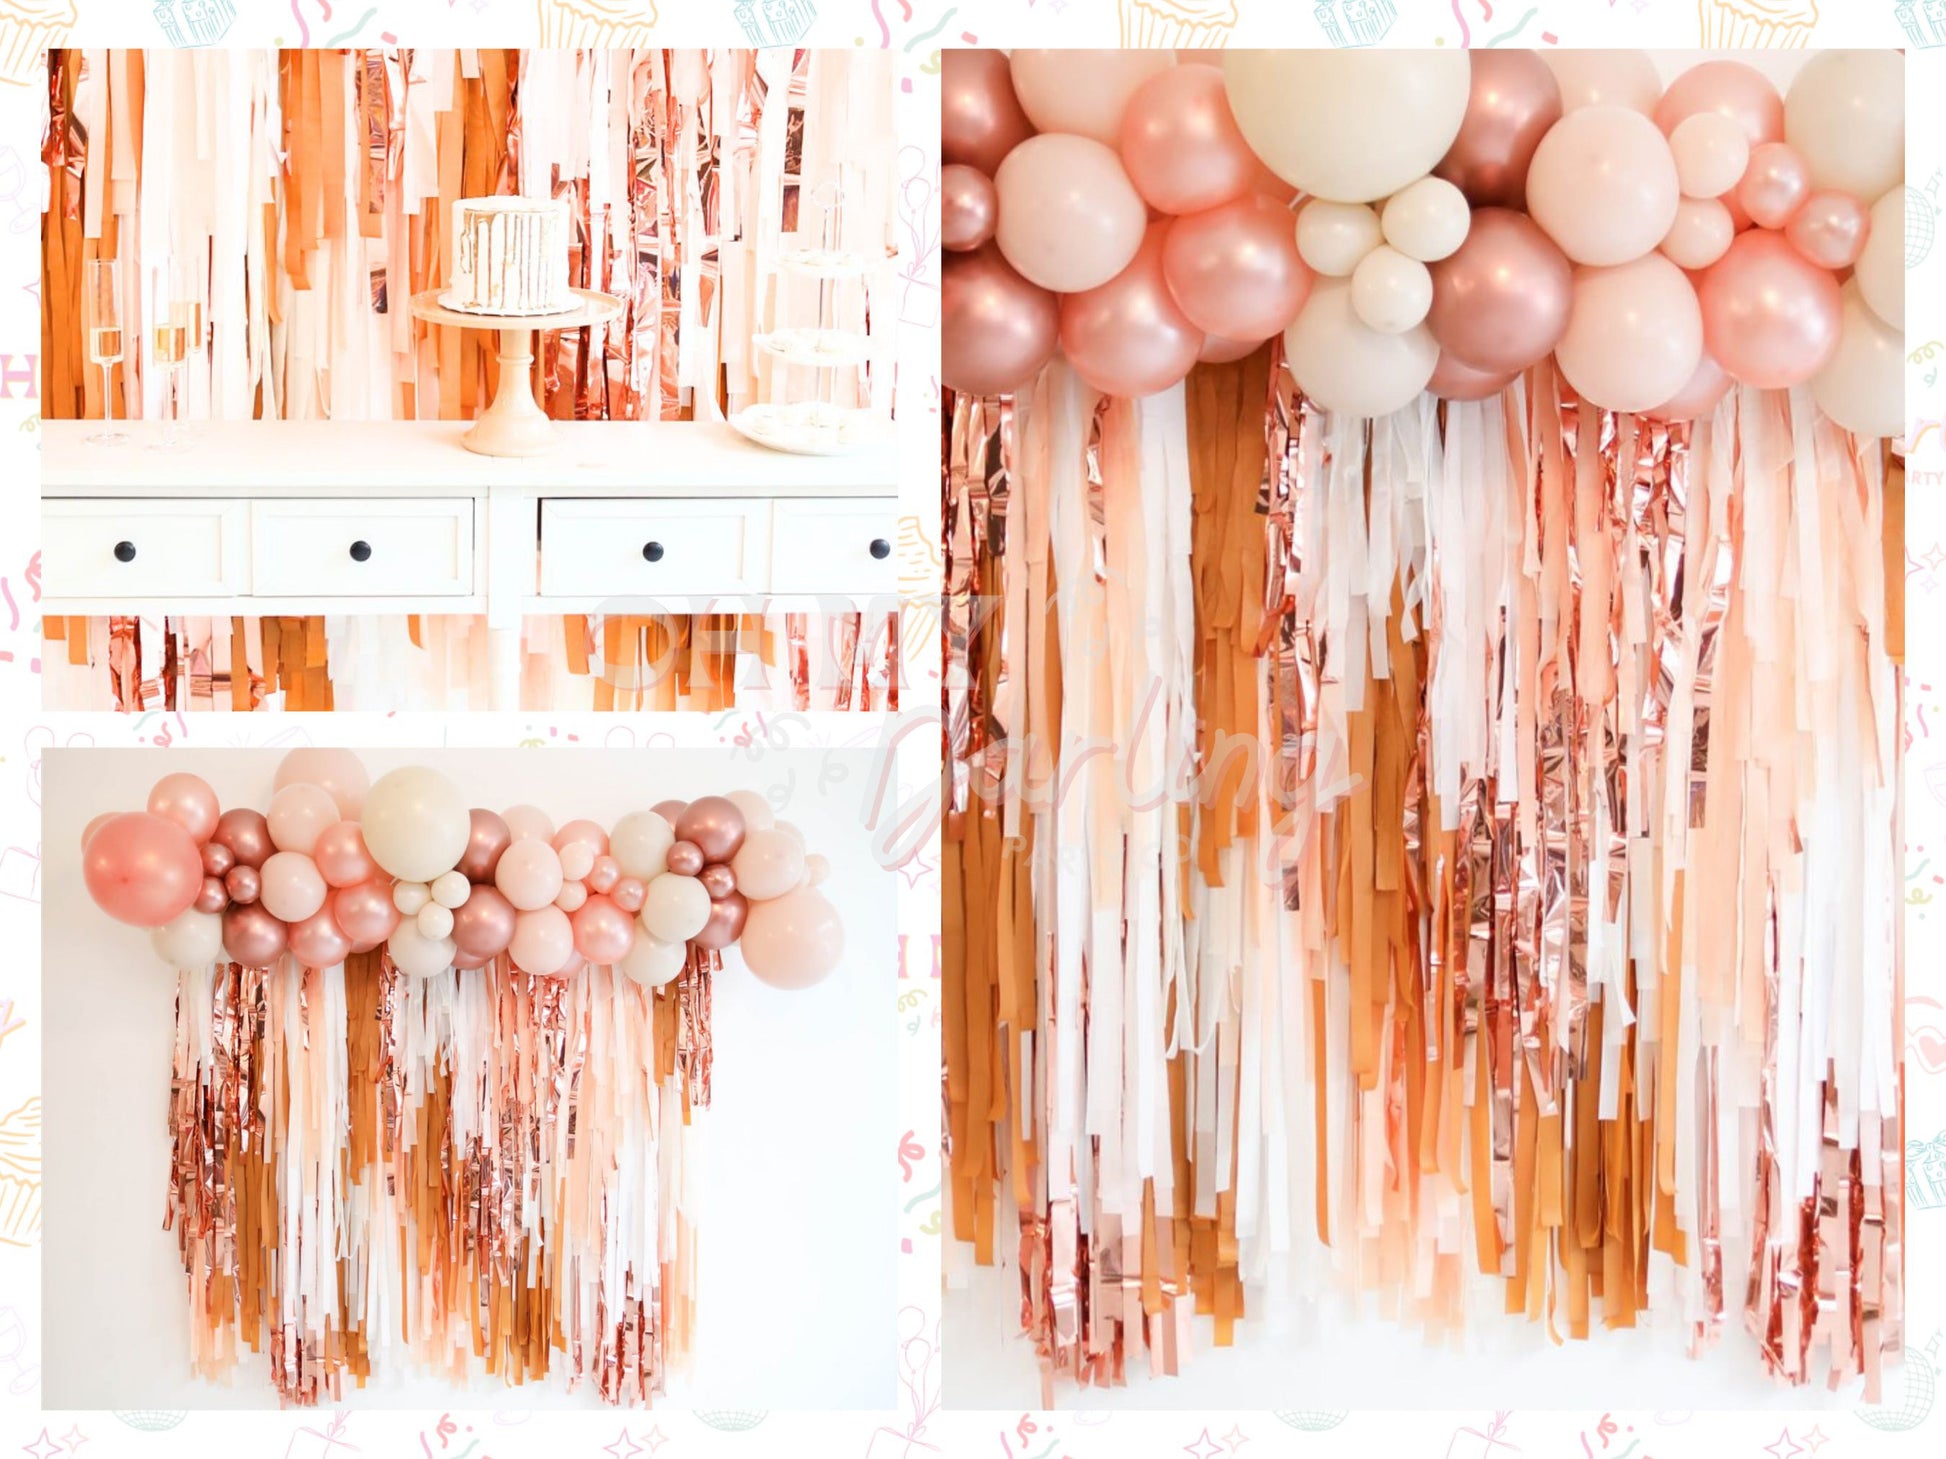 Palm Springs Fringe Backdrop-Fringe Backdrop-Party Decor-Oh My Darling Party Co-Oh My Darling Party Co-30A bachelorette, baby pink, bachelorette, bachelorette party, backdrops for party, balloon garlands, boating bachelorette, boho bachelorette, florida bachelorette, fringe backdrop, fringe garland, Fringe Streamers, got your bash, lake bachelorette, nashty bachelorette, neutral bachelorette, OMDPC, palm springs bachelorette, pampas bachelorette, party backdrops, peach, peachy, Pink, pink and orange bachelo